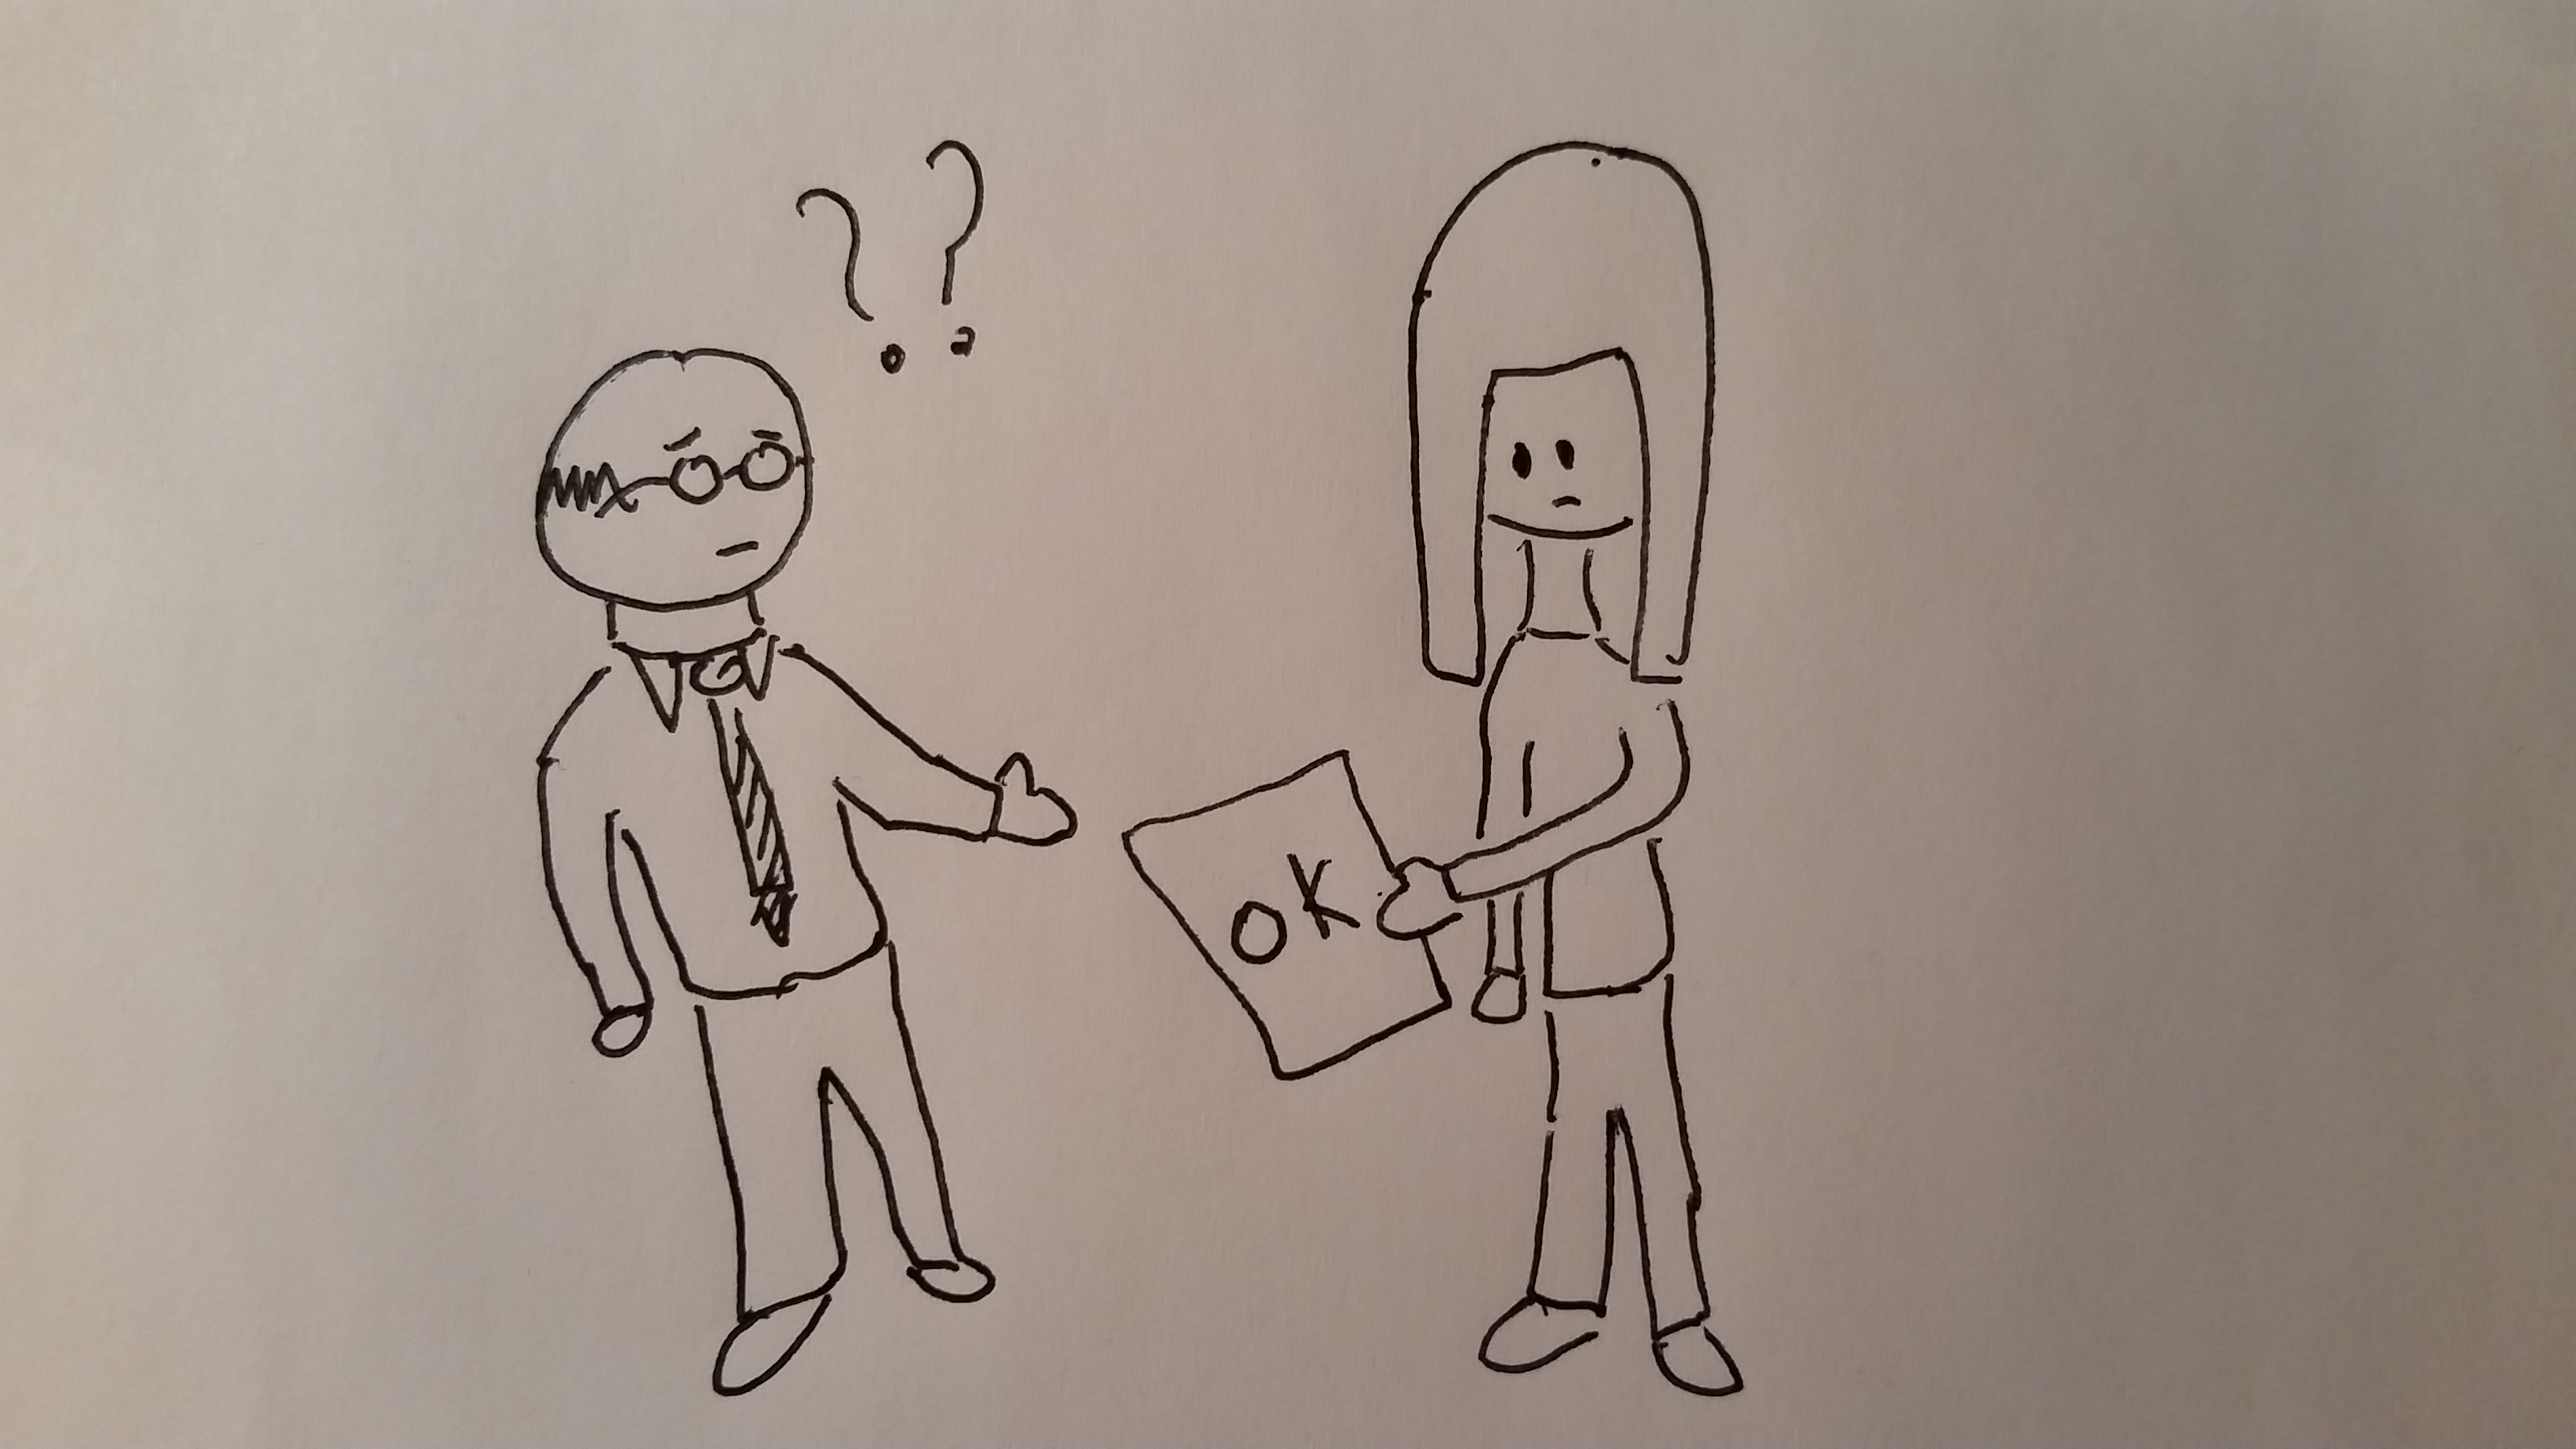 Cartoon-Man-Woman with Okay sign. Don't personalize responses.